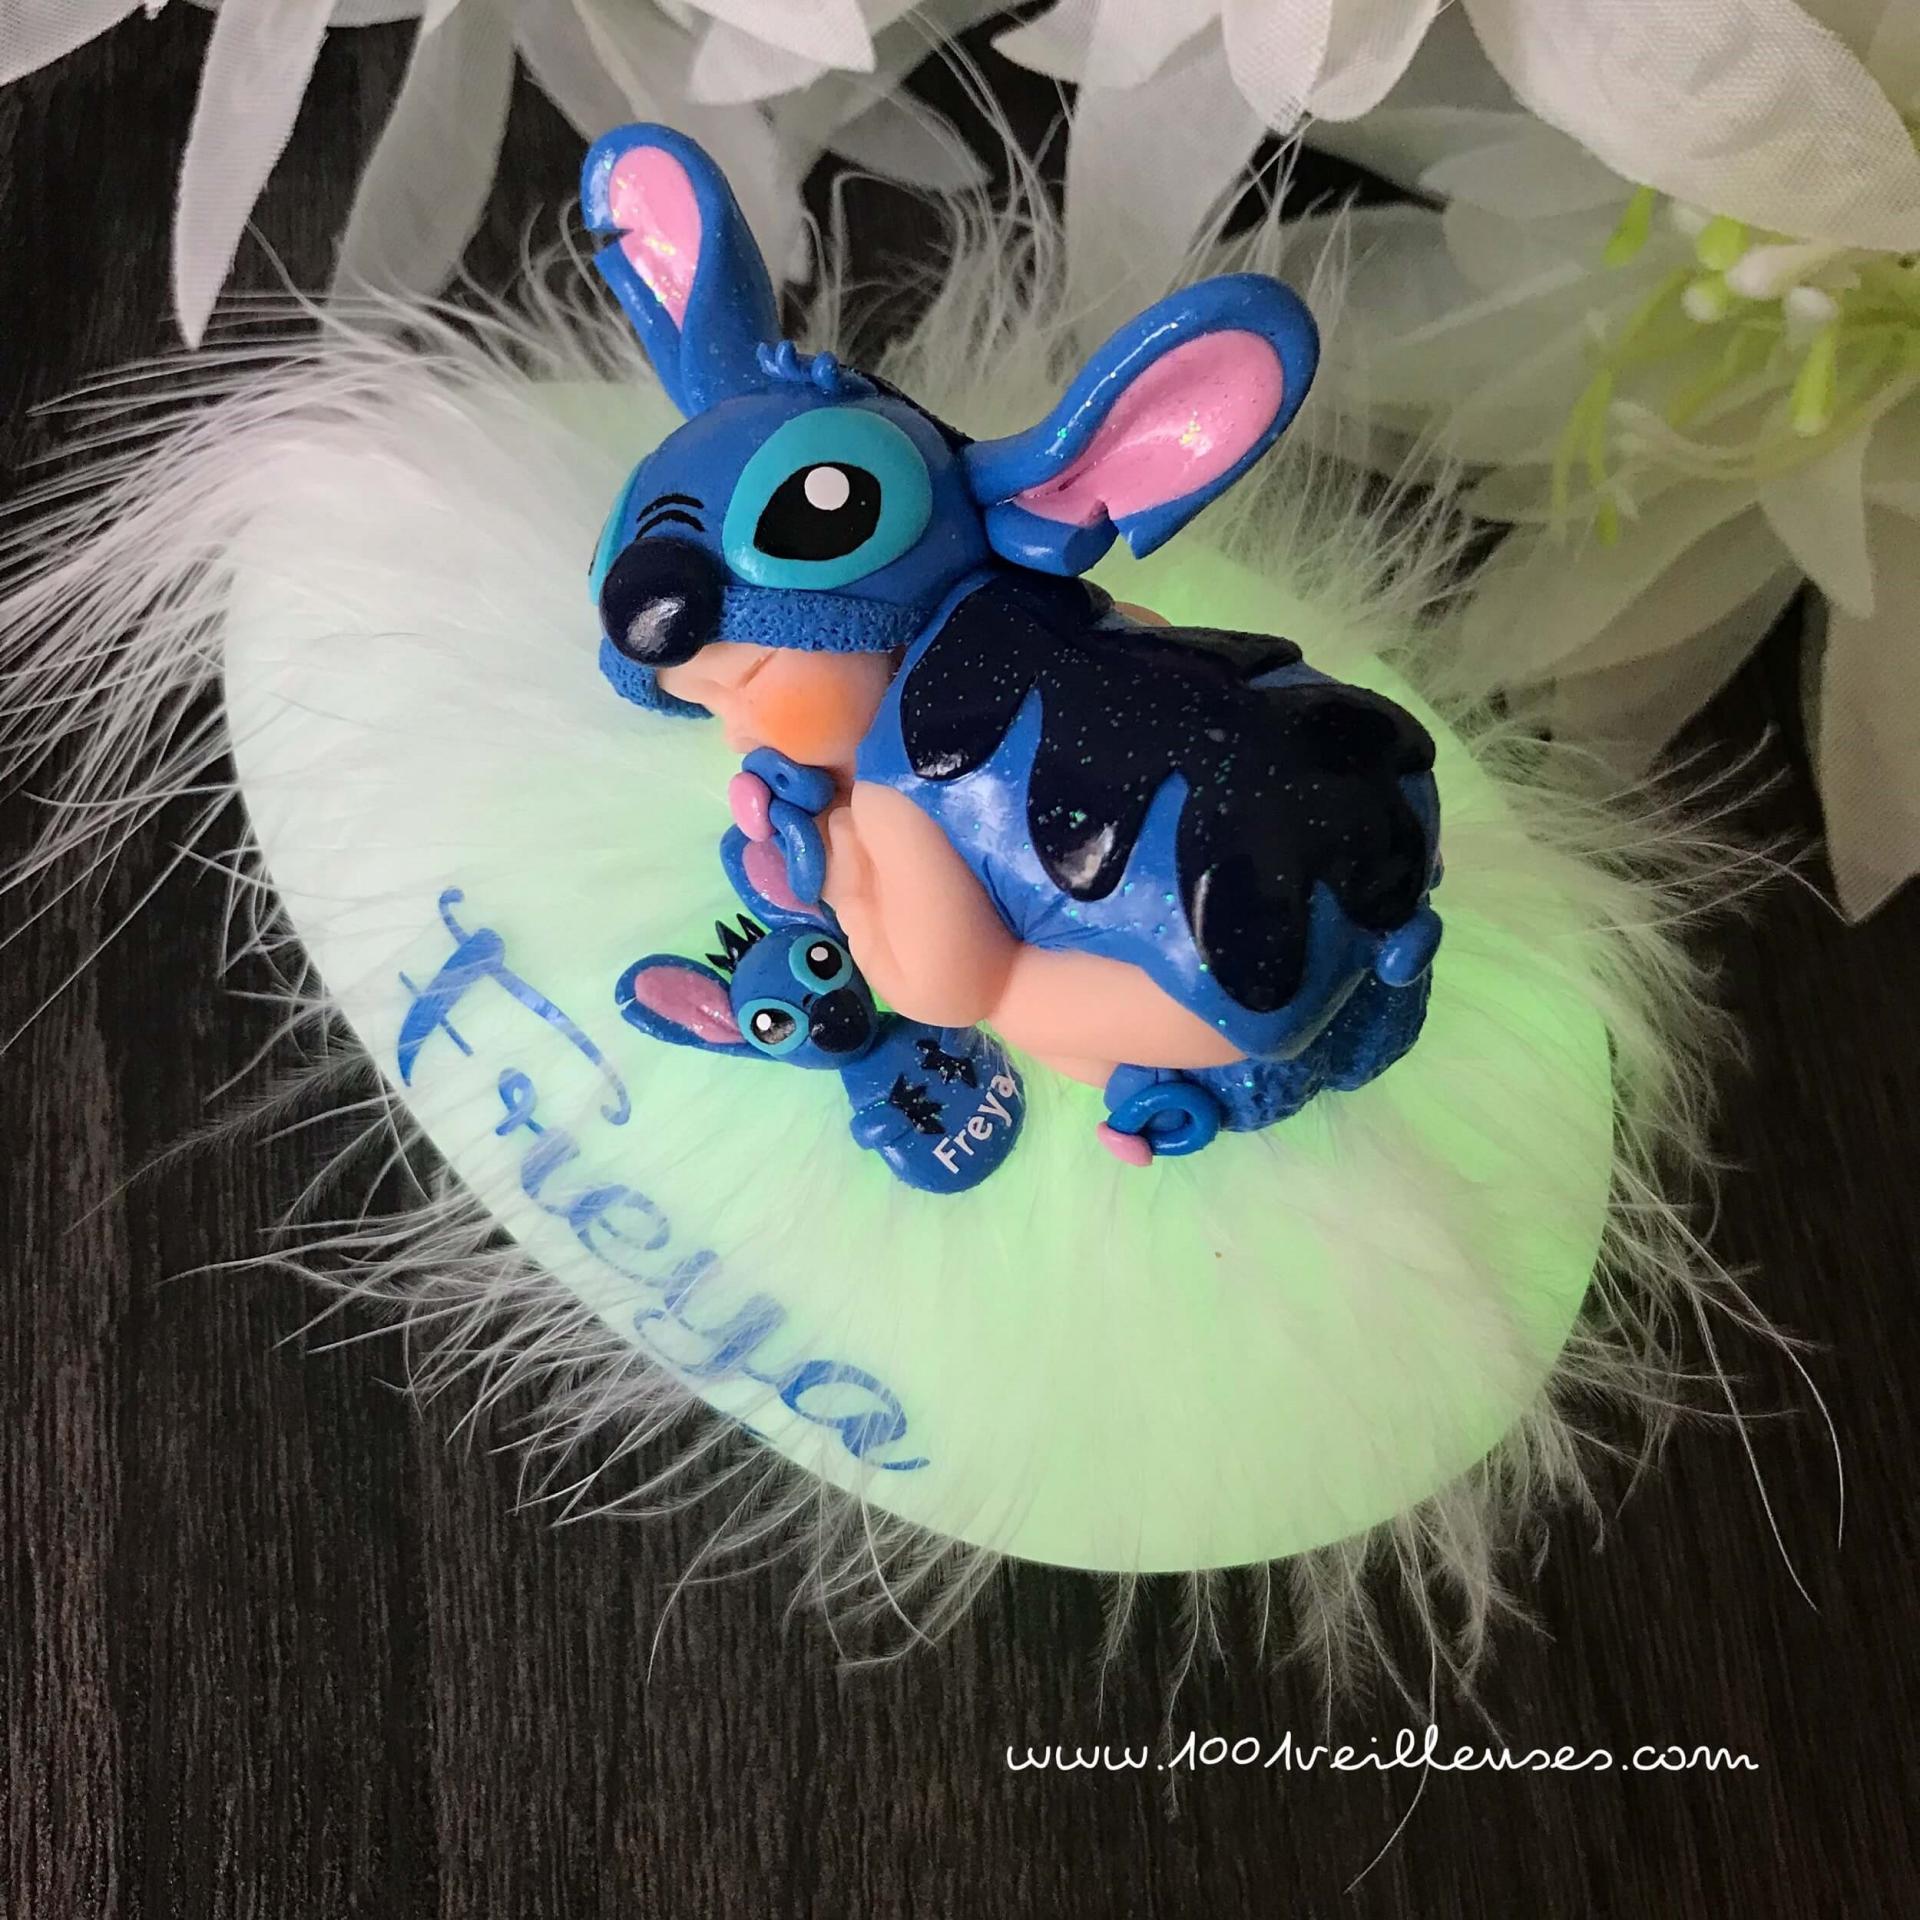 Multicolored lighted pebble with a baby sculpted in polymer clay dressed up as Stitch, top view